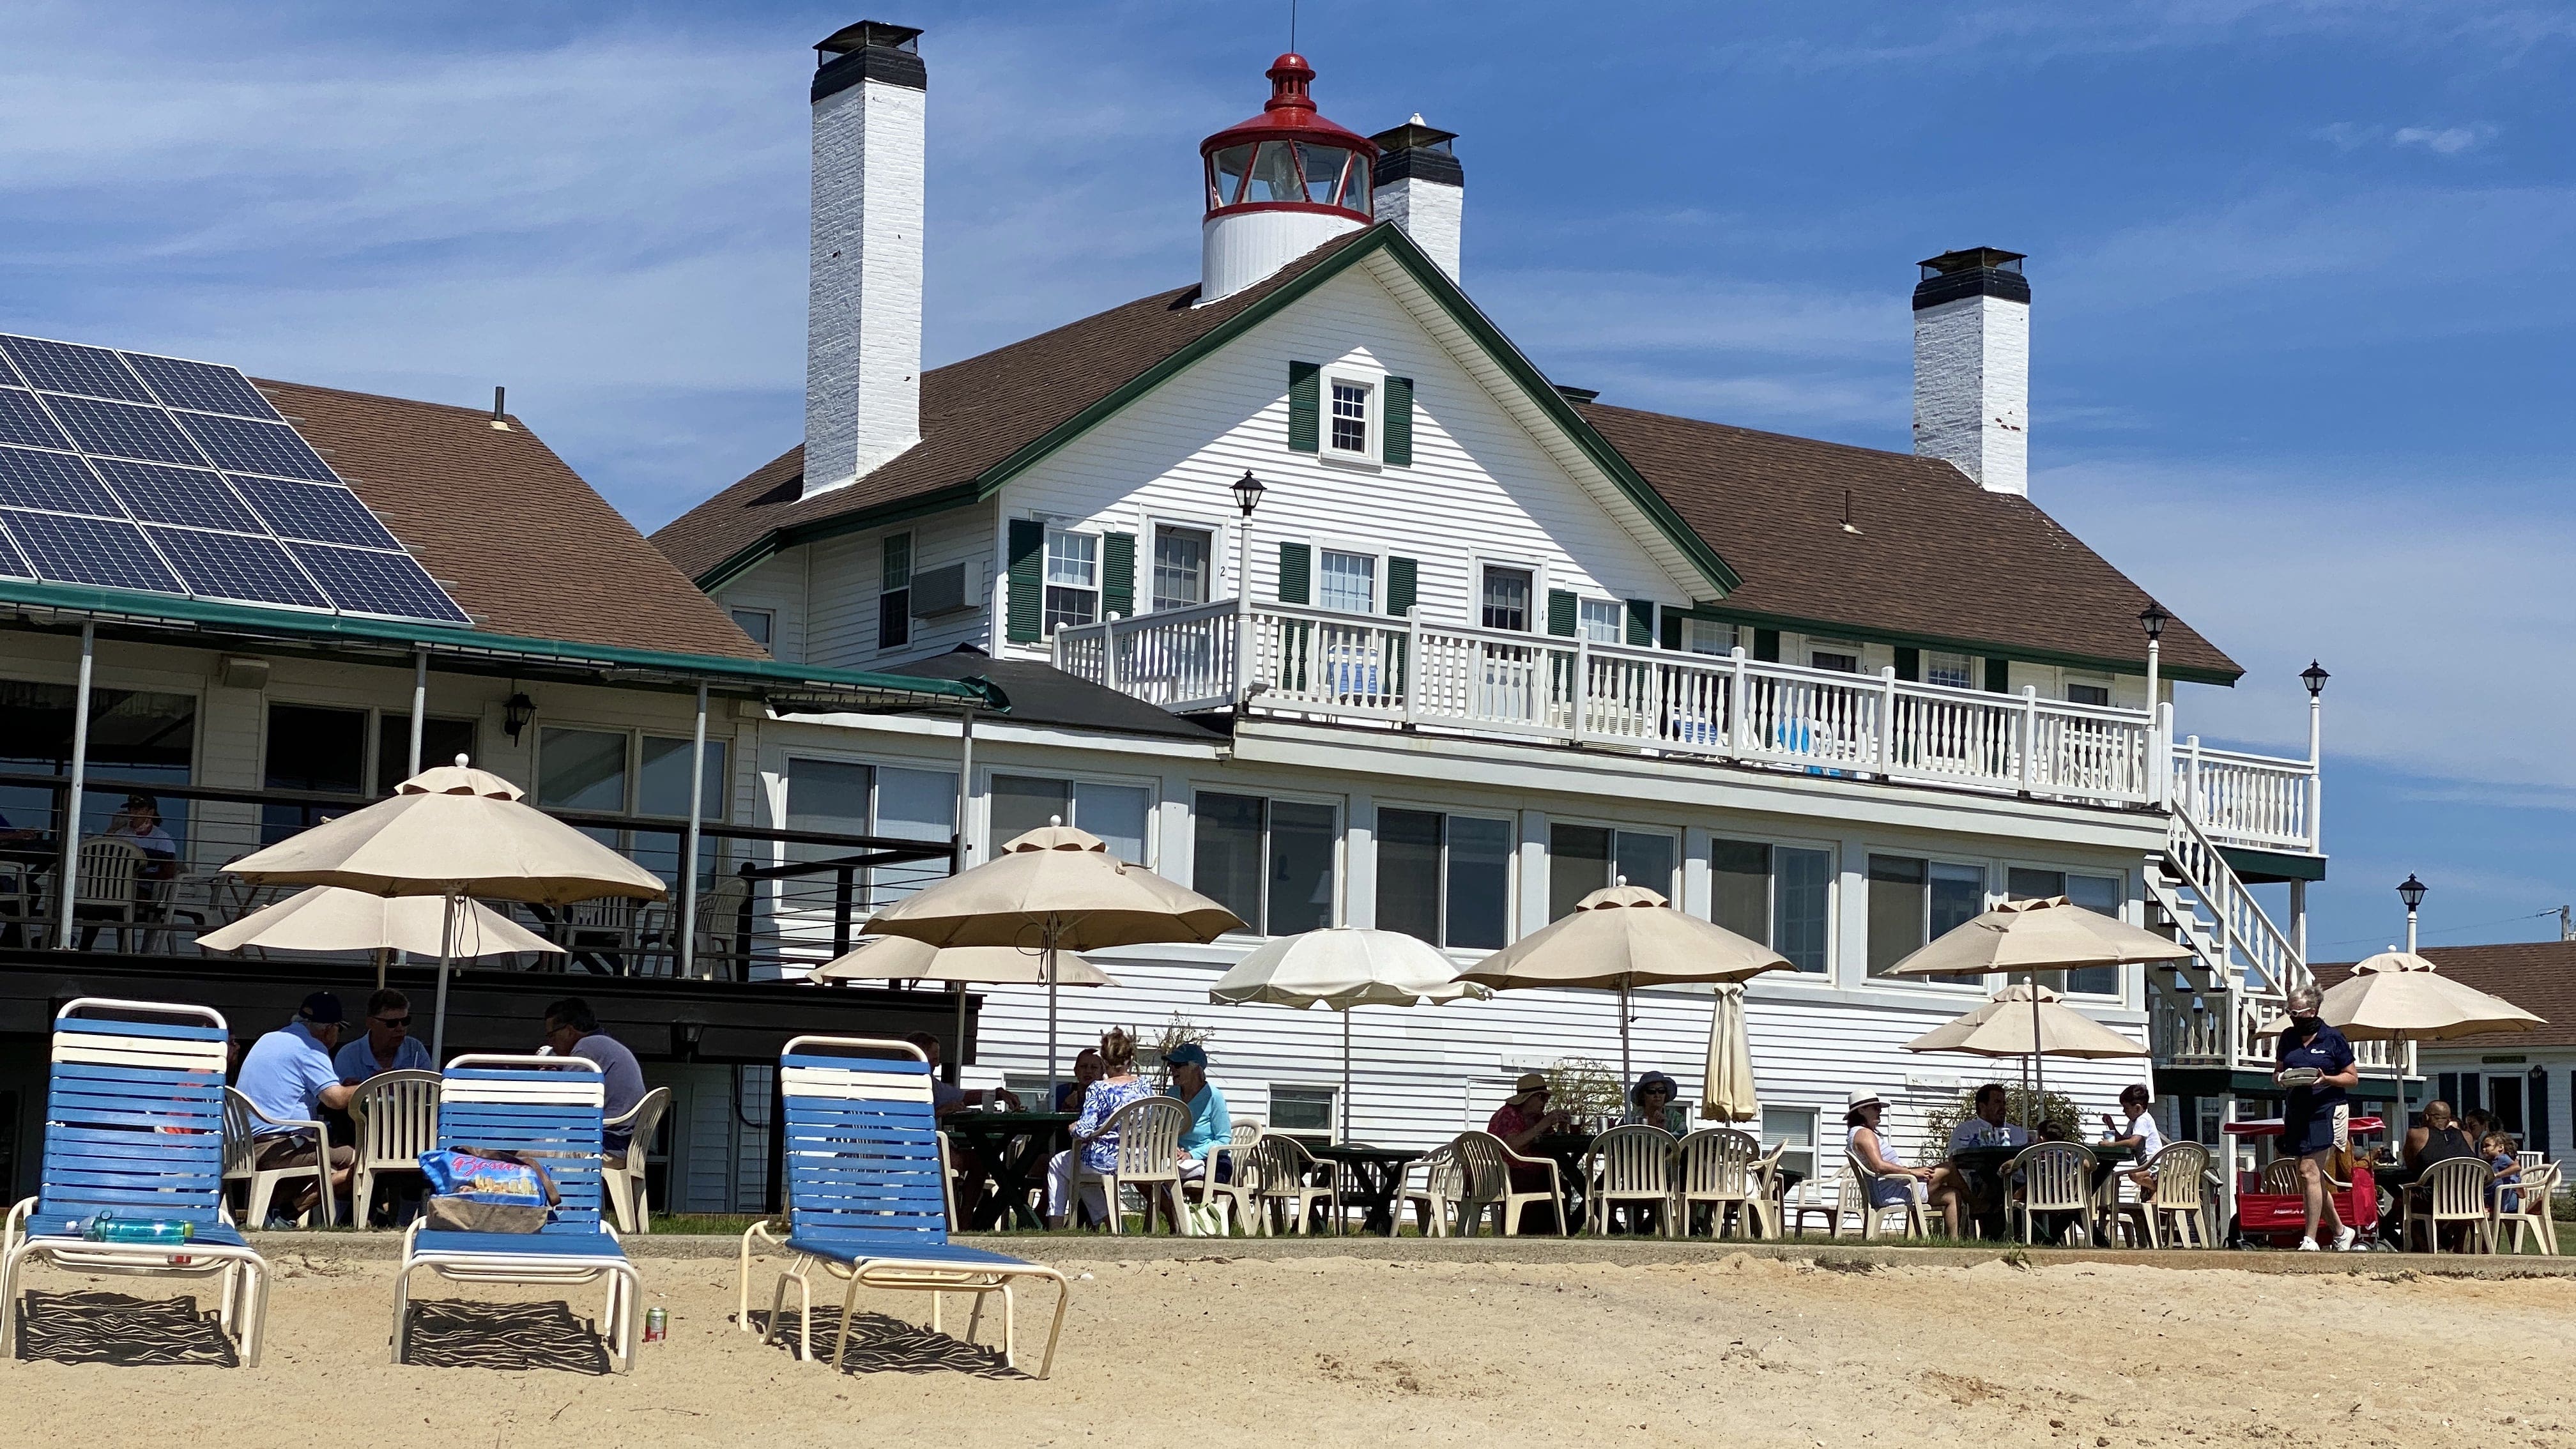 The Waterfront at Lighthouse Inn cape cod dining seaside